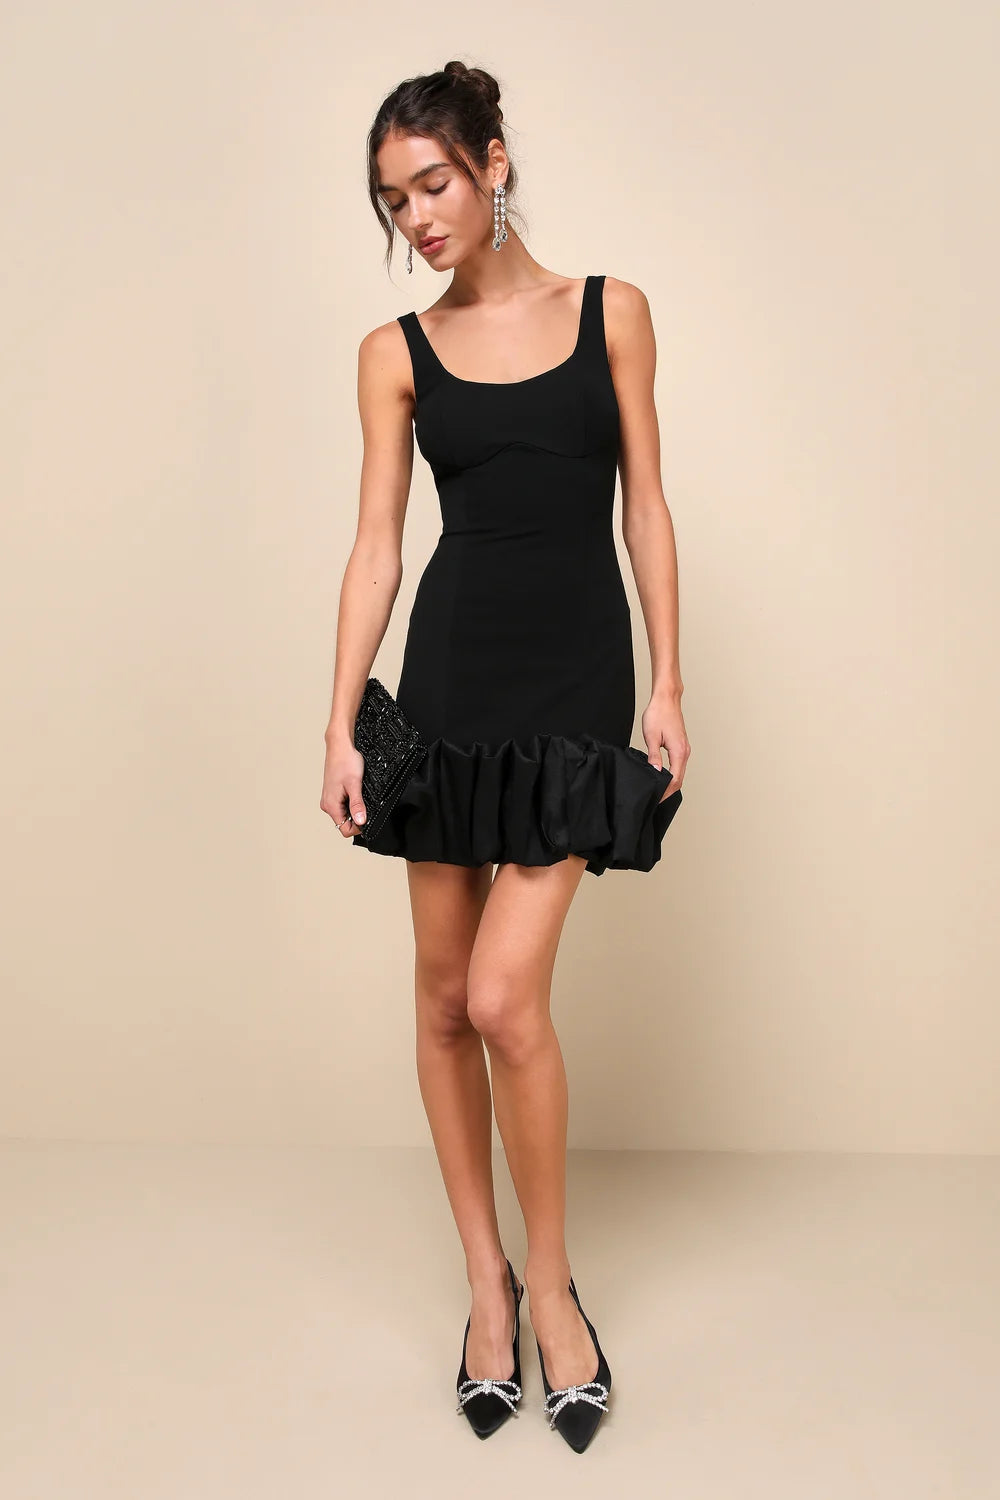 Front view of the Essentially Flirty Black 3D Ruffle Hem Bodycon Mini Dress by Lulus, sold at Harbour Thread